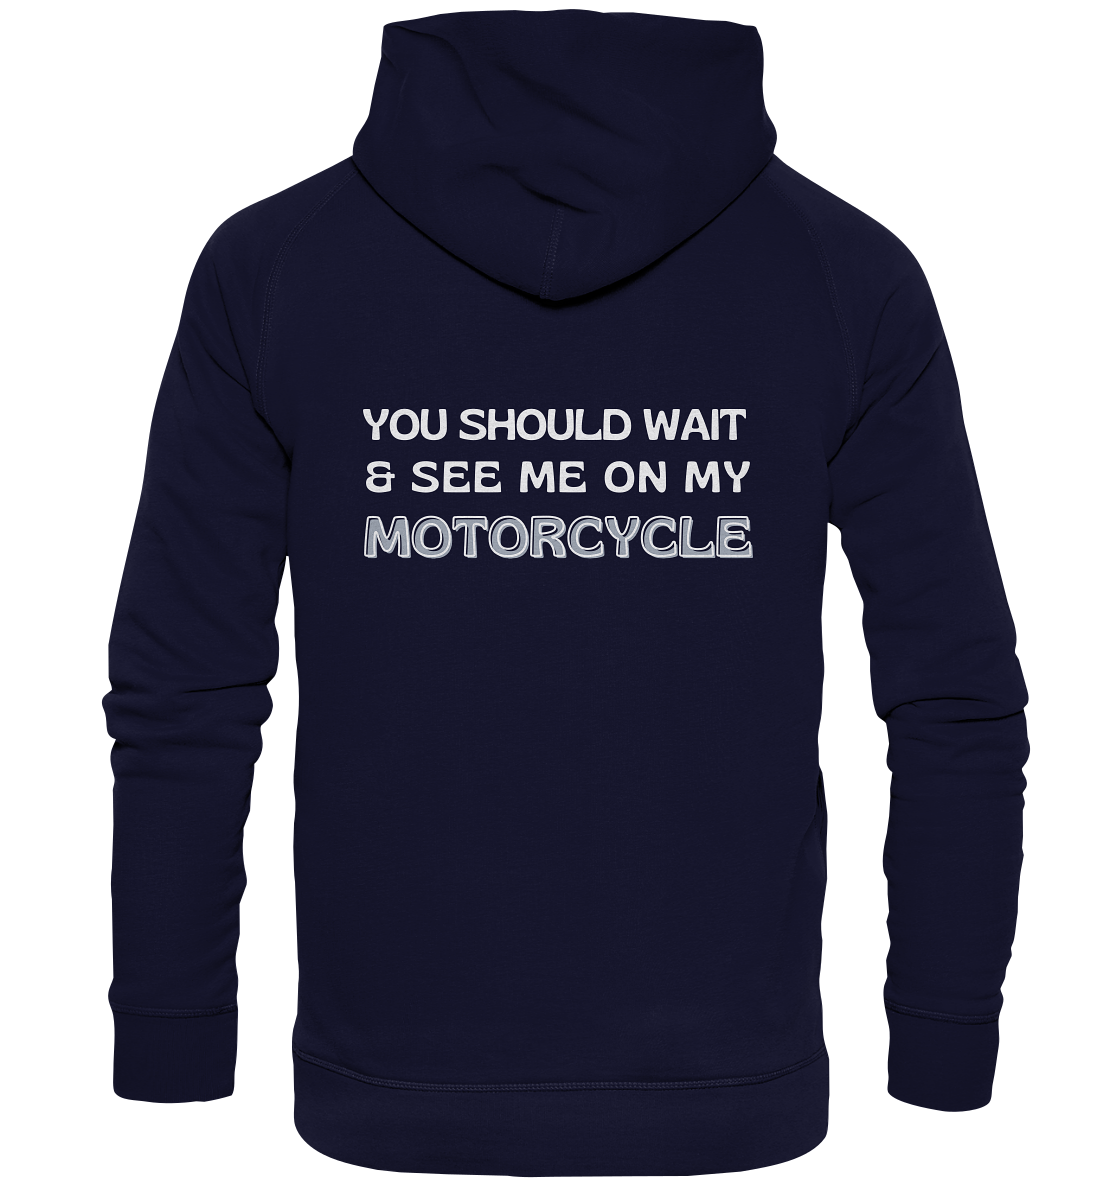 Motorrad-Hoodie _ beidseitig bedruckt. vorn: "If you think I'm sexy already", hinten "you should wait & see me on my motorcycle.", blau